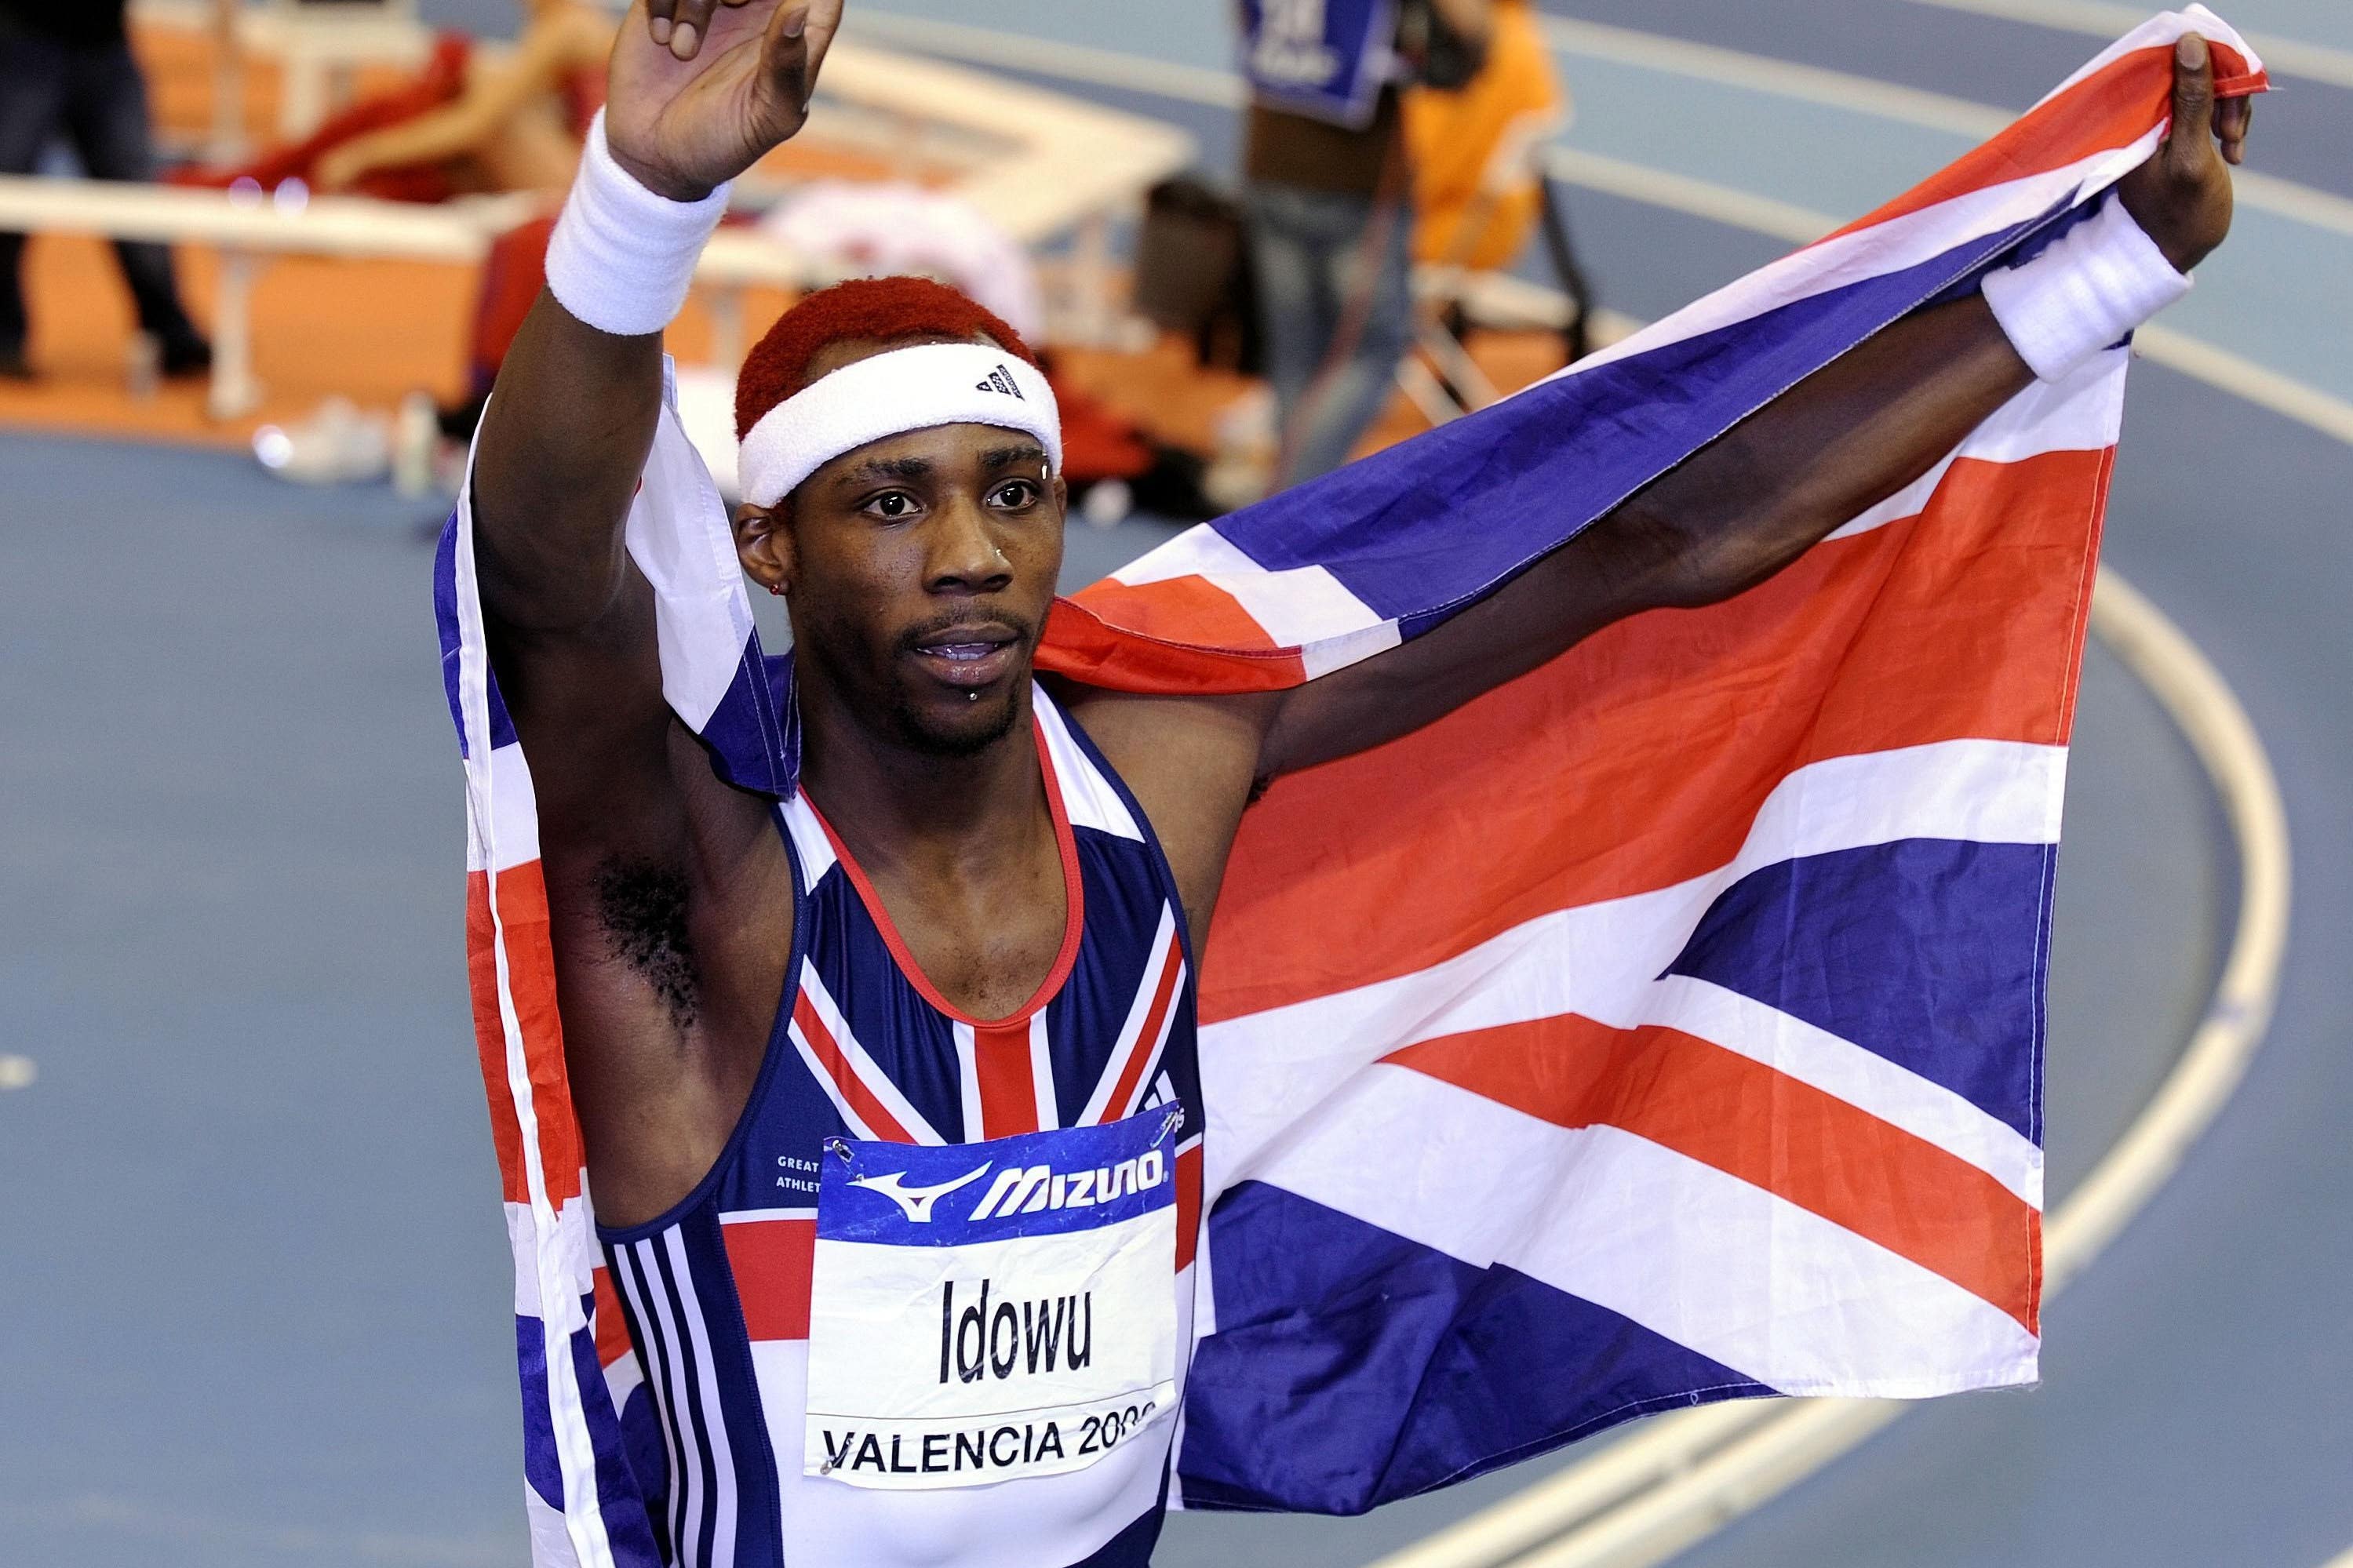 Phillips Idowu celebrated after taking gold in Valencia (John Giles/PA)